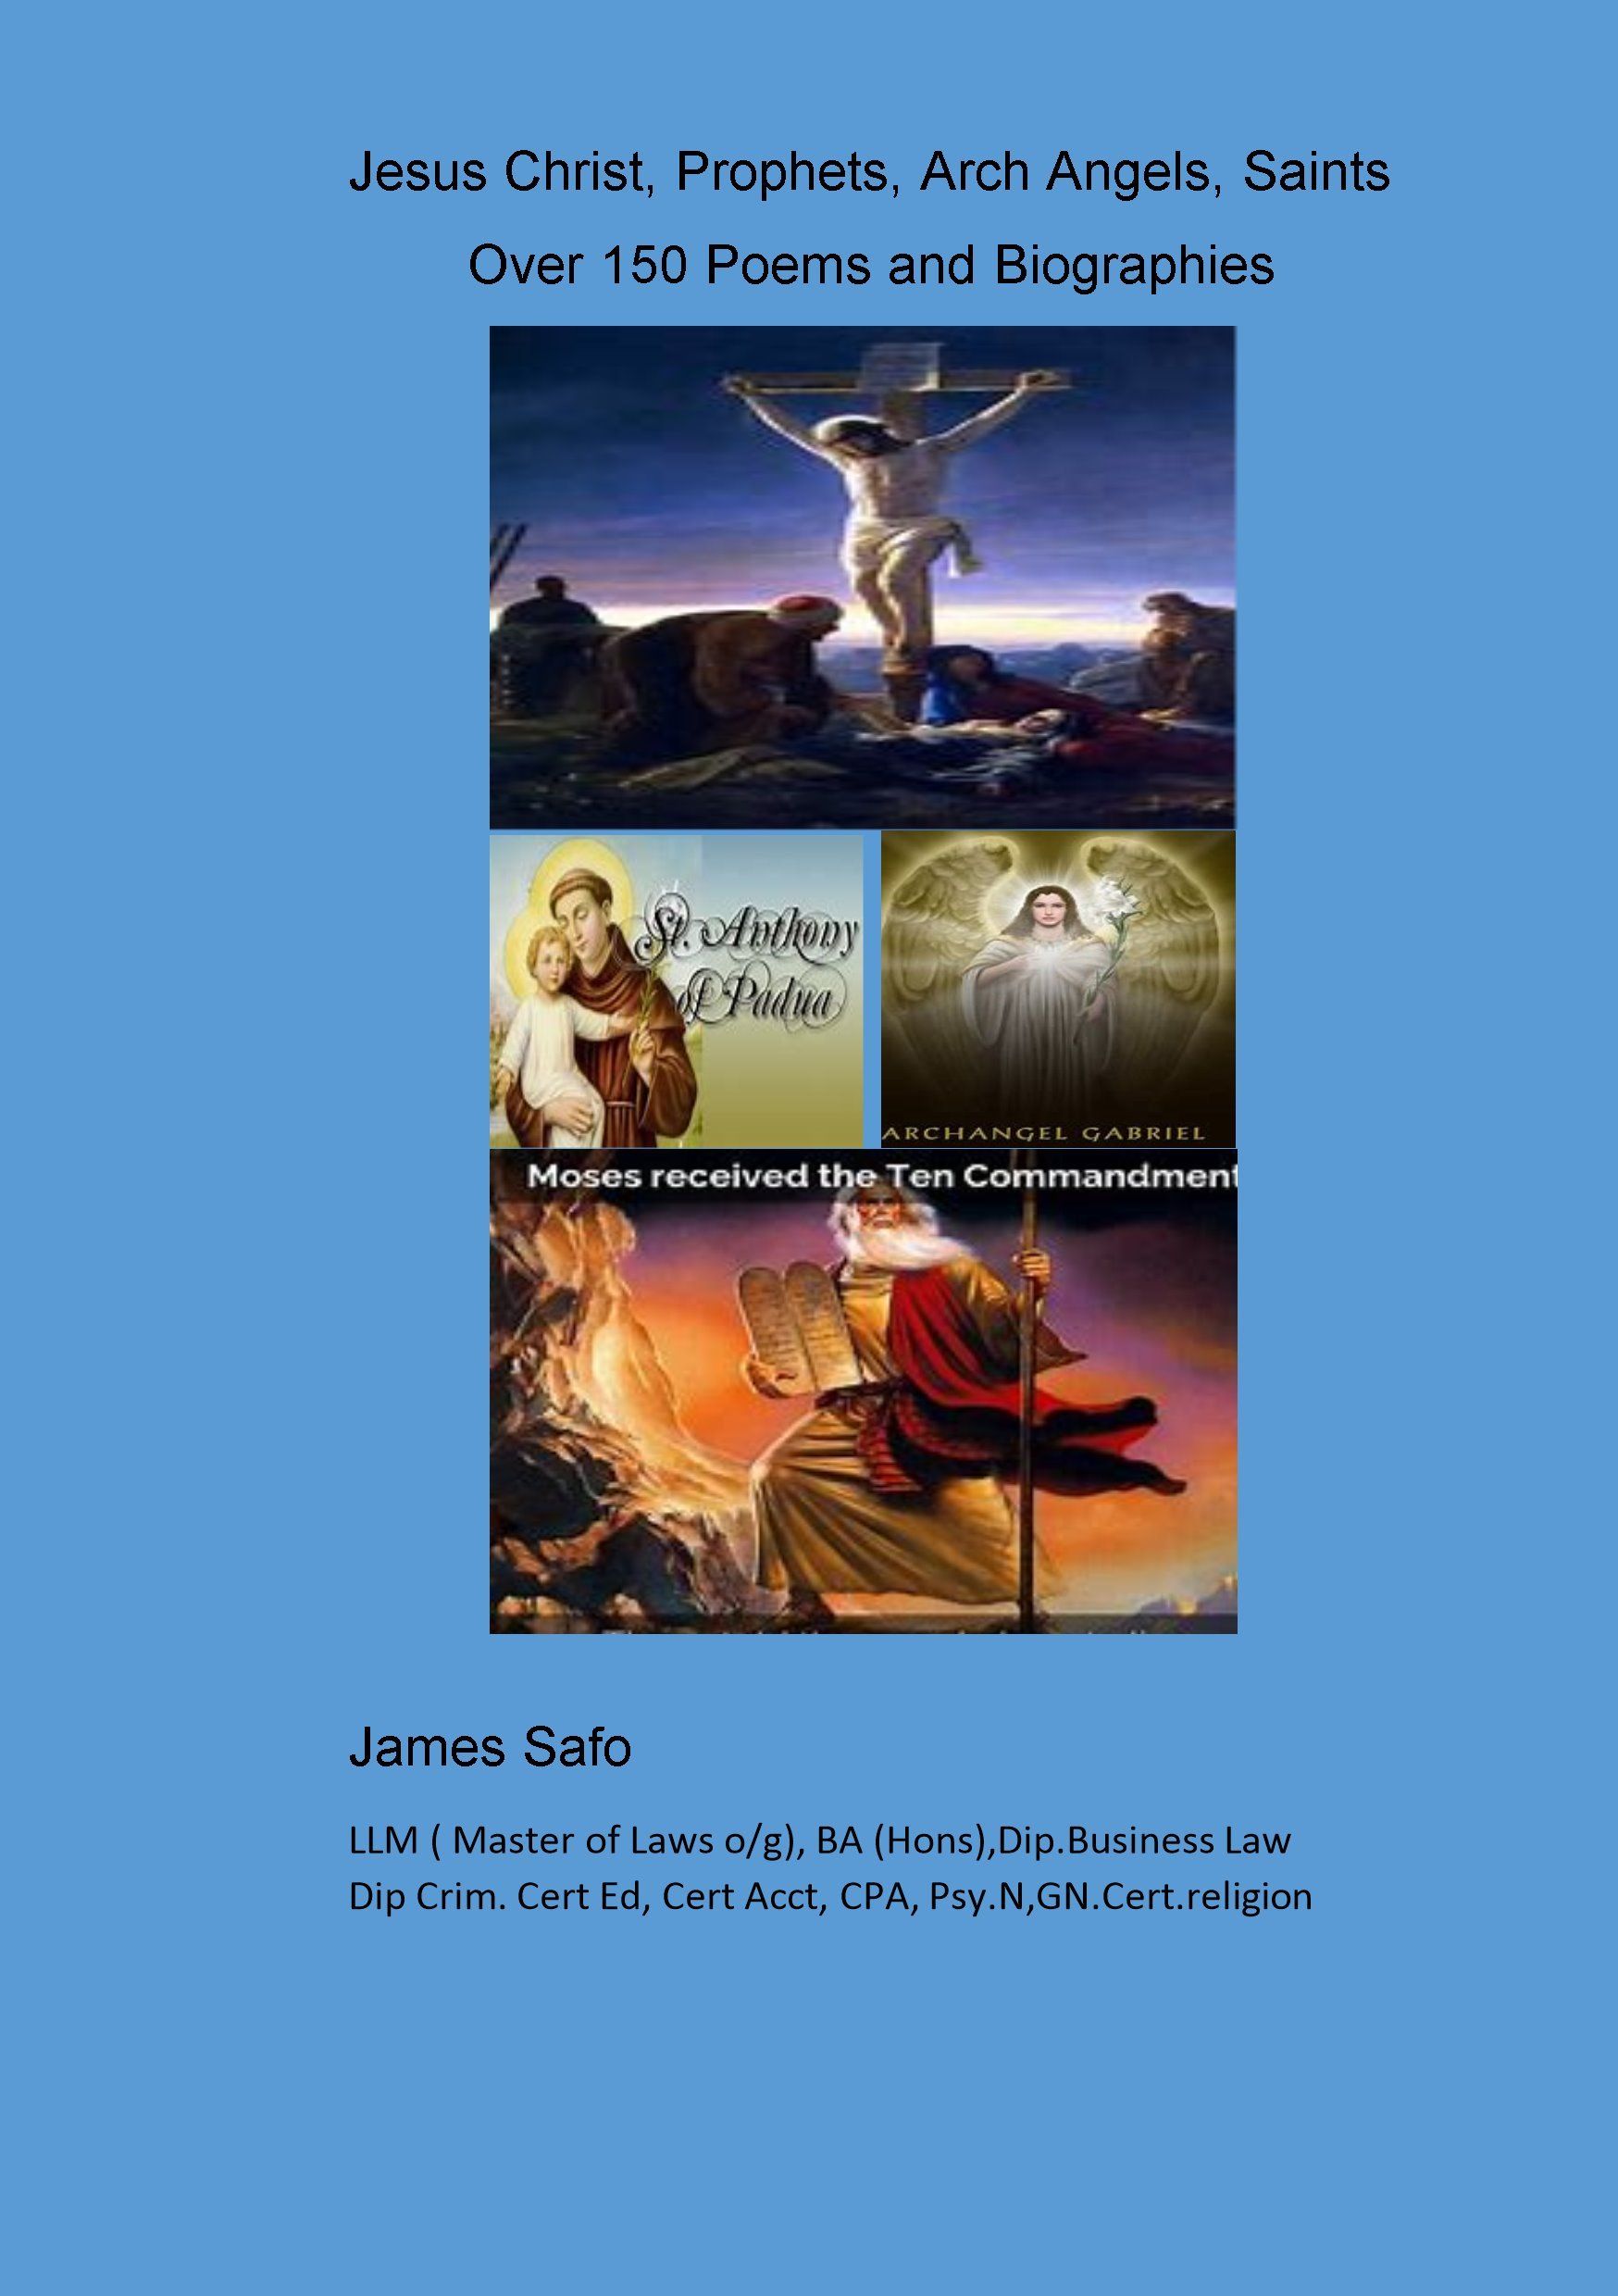 Jesus Christ, Prophet, Arch Angels, Saint ( Over 150 poems and Biography